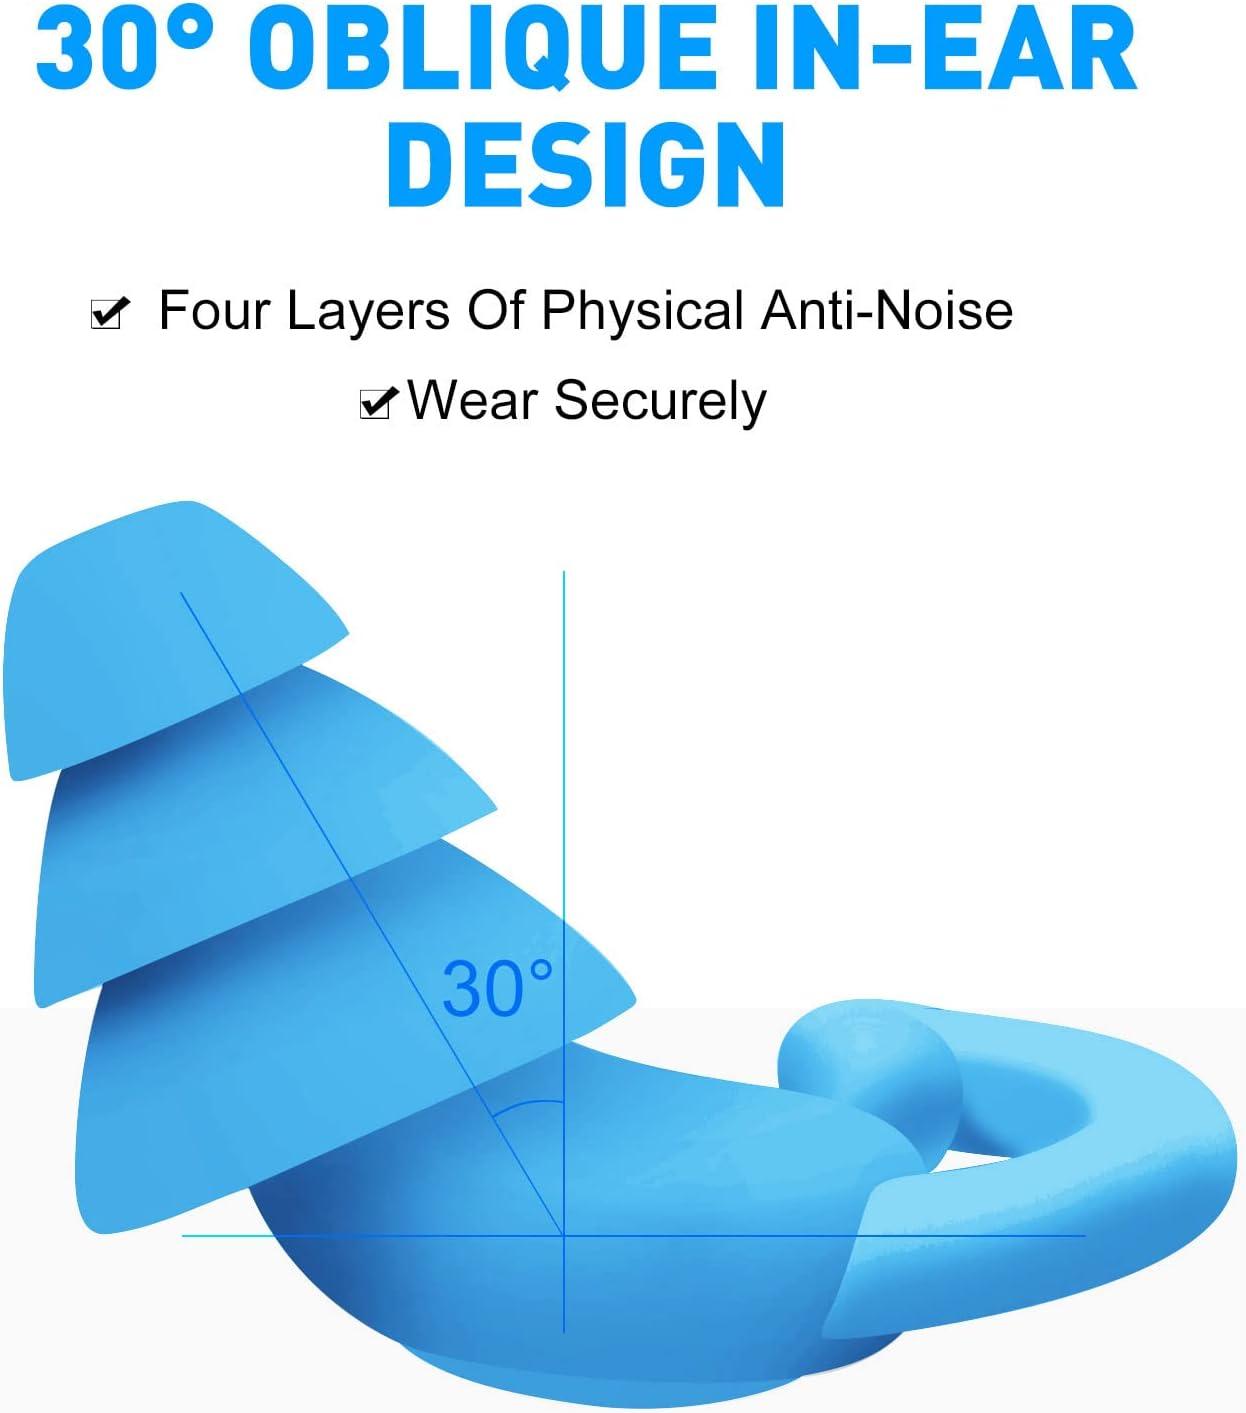 Silicone Ear Plugs for Noise Reduction - Reusable Soft Comfortable